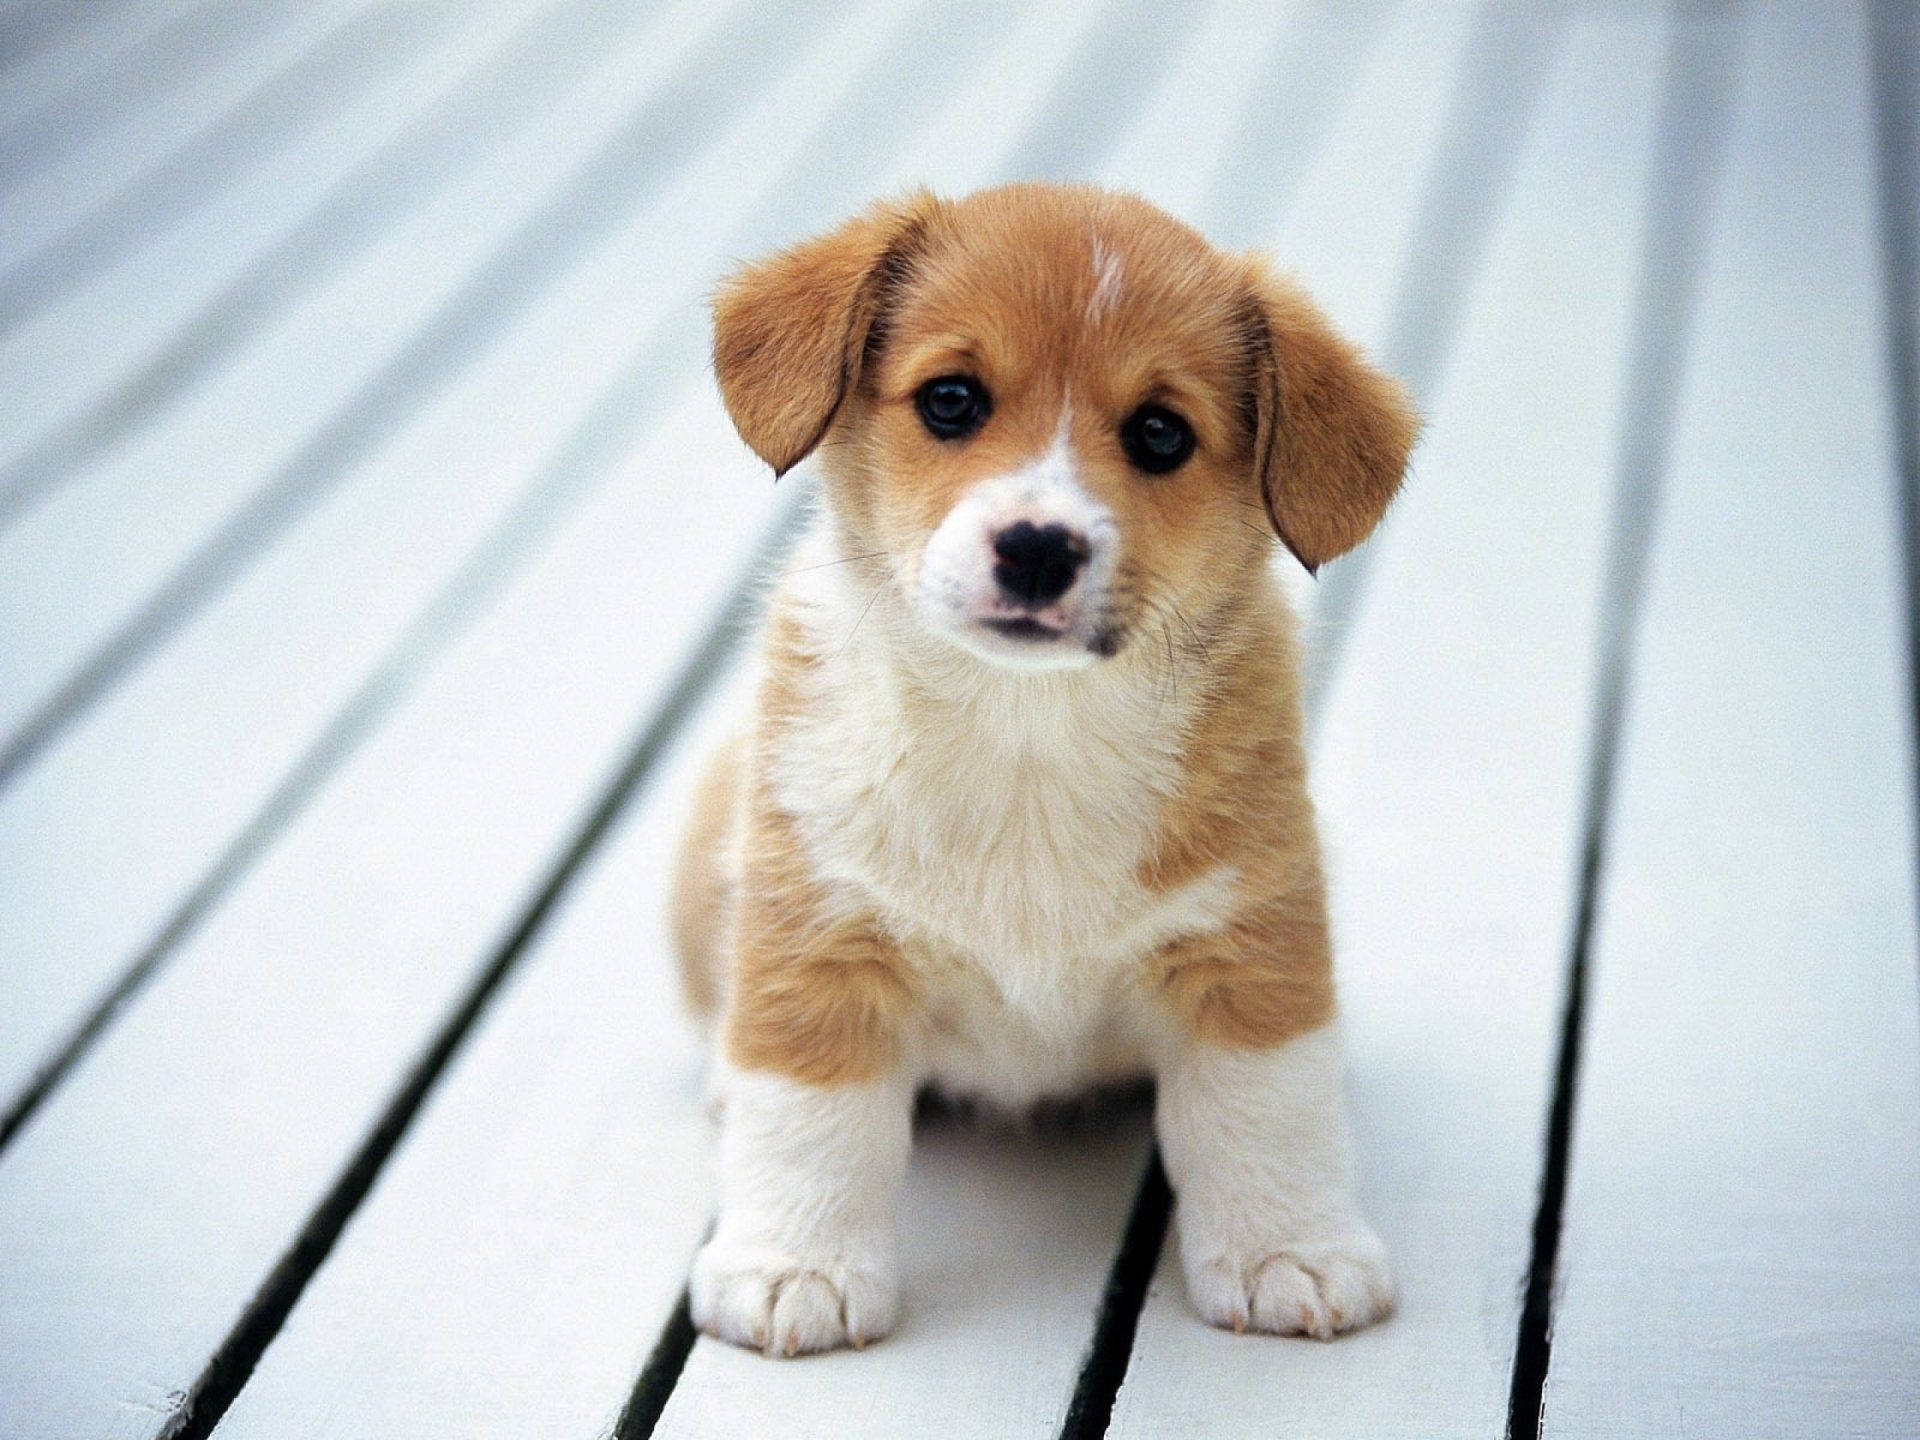 Staring Puppy Picture Wallpaper